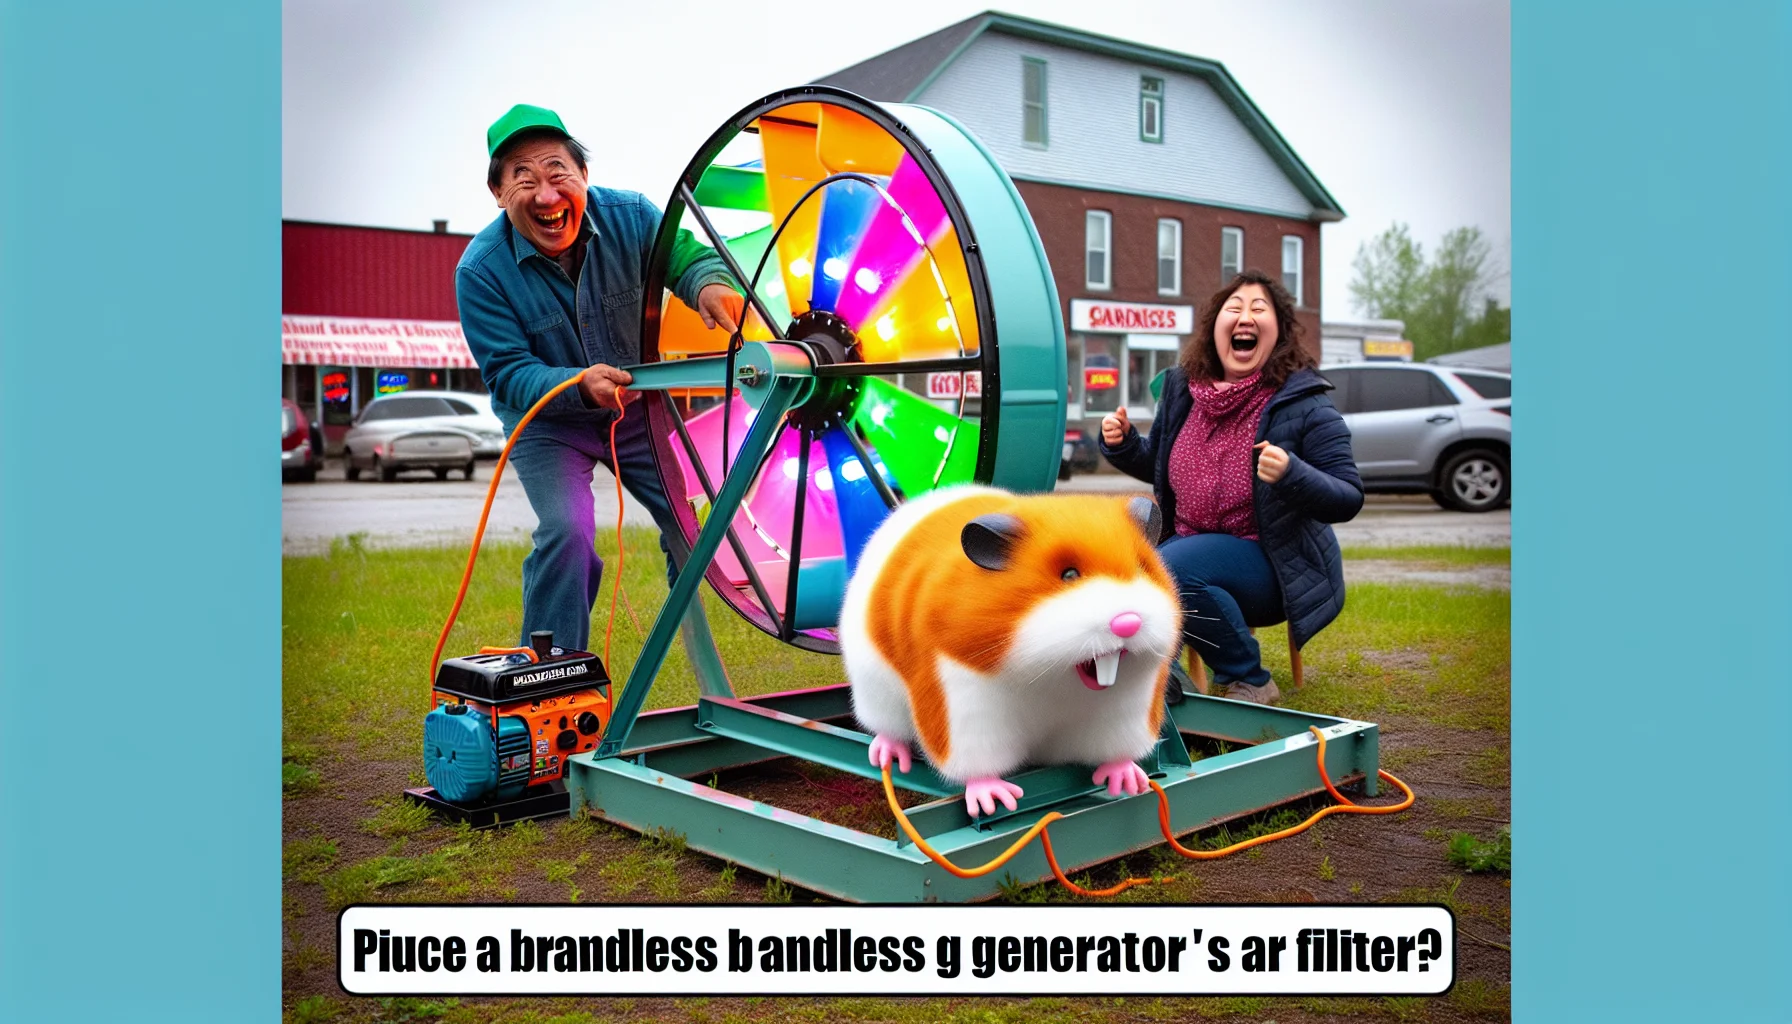 Picture a hilarious scenario showcasing a brandless generator's filter. In a small town, the local barber, a charismatic South Asian man, and a kindergarten teacher, an energetic Hispanic woman, have found a unique way to use the generator. They've rigged it up to a giant hamster wheel for a life-size faux hamster in the park. When the hamster runs, it powers the generator, flipping on bright, multicolored lights on the fake fur of the hamster. This humorous spectacle draws laughing crowds, amusing everyone with its unorthodox method of generating electricity.